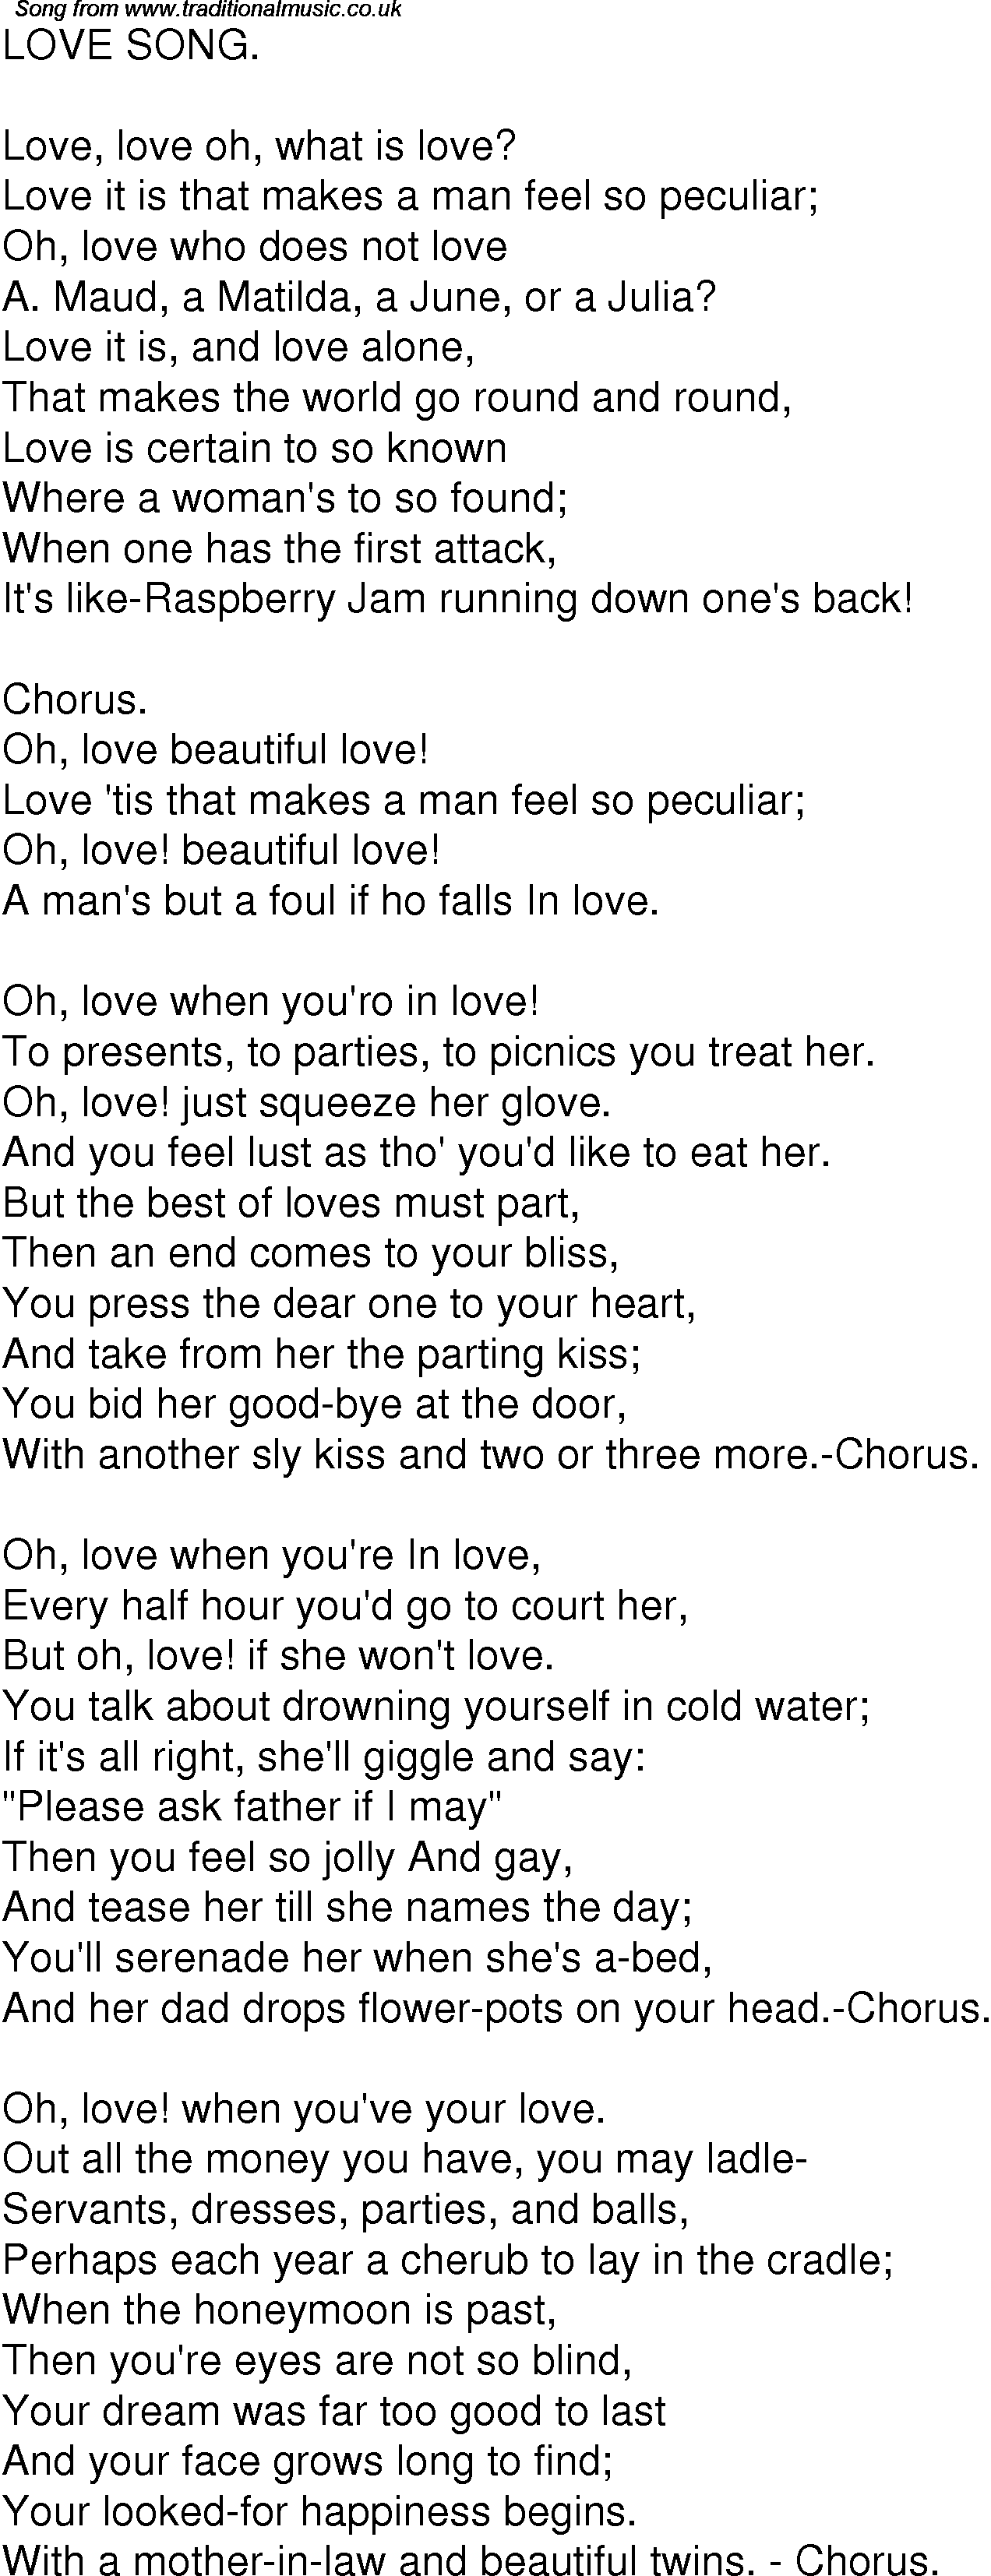 Old Time Song Lyrics For 06 Love Song